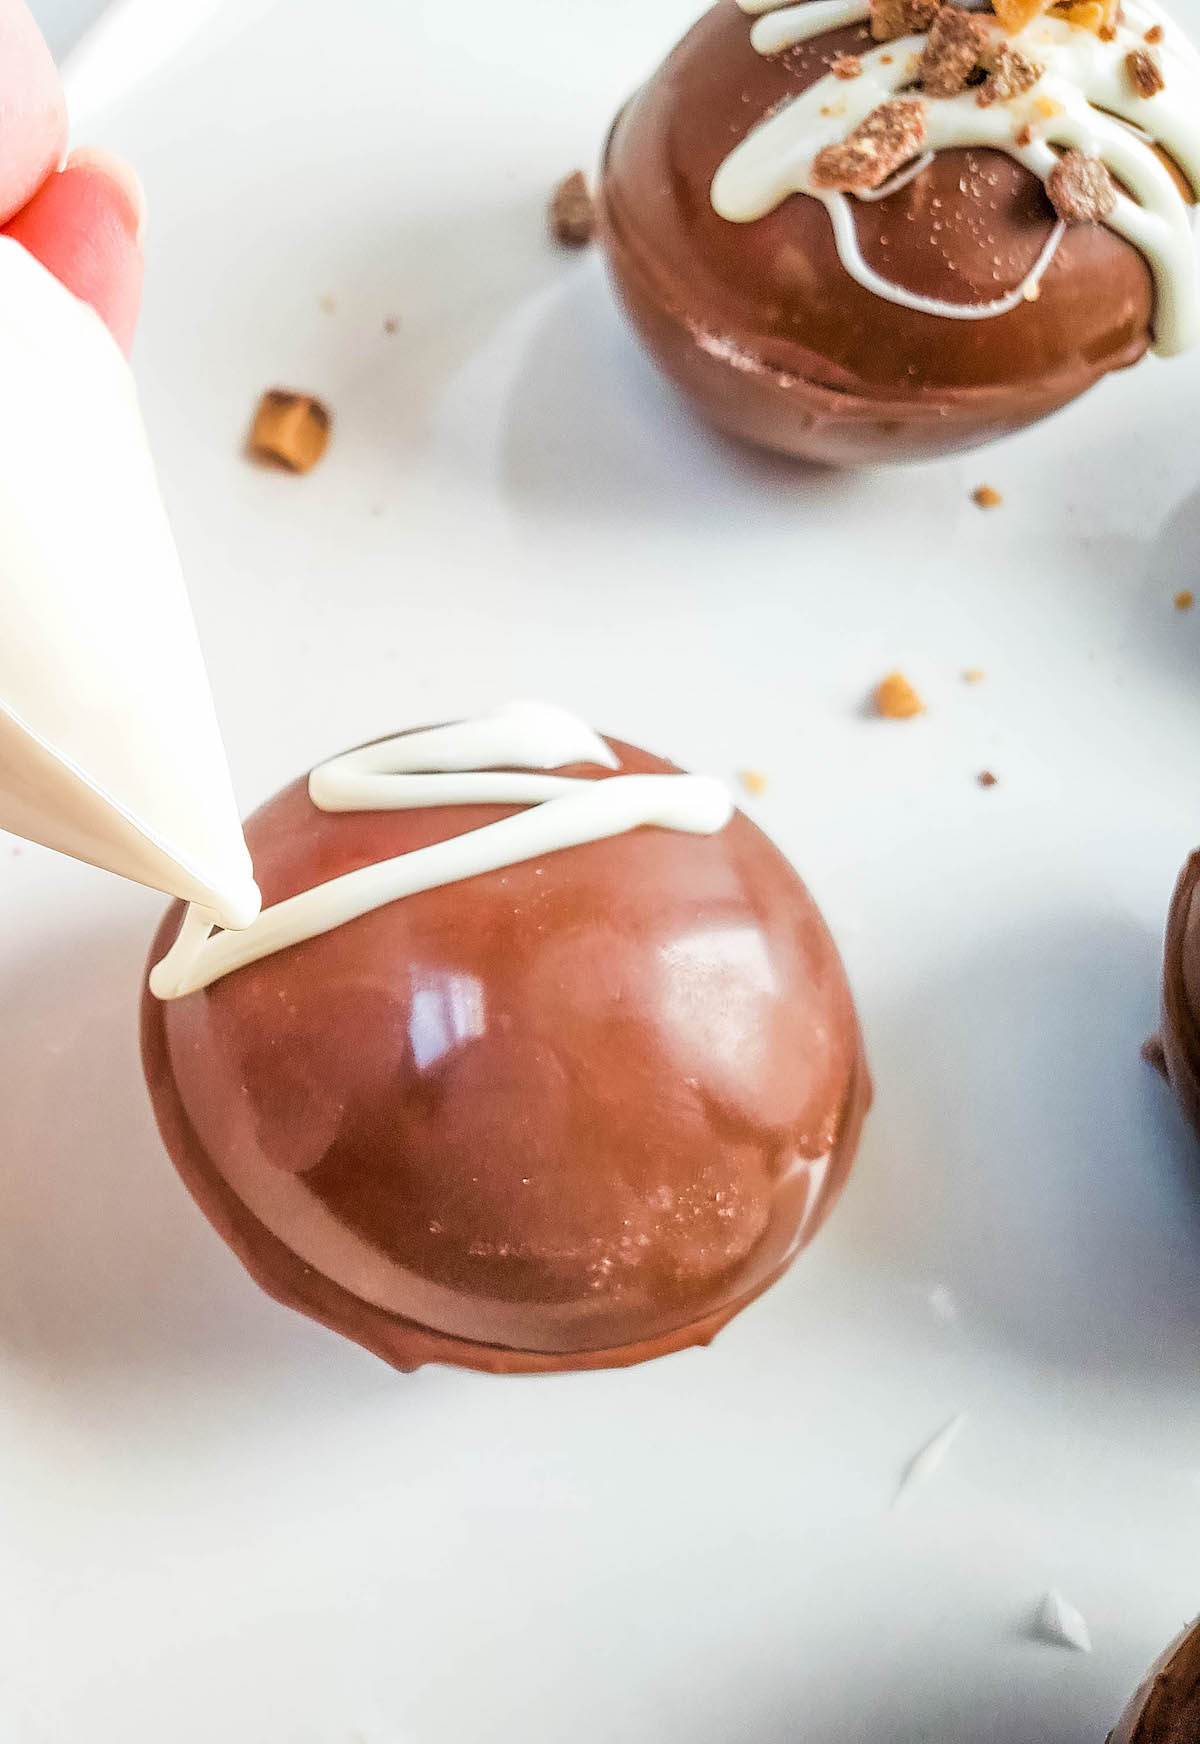 A piping bag is used to add melted white chocolate to the top of a chocolate cappuccino bomb.